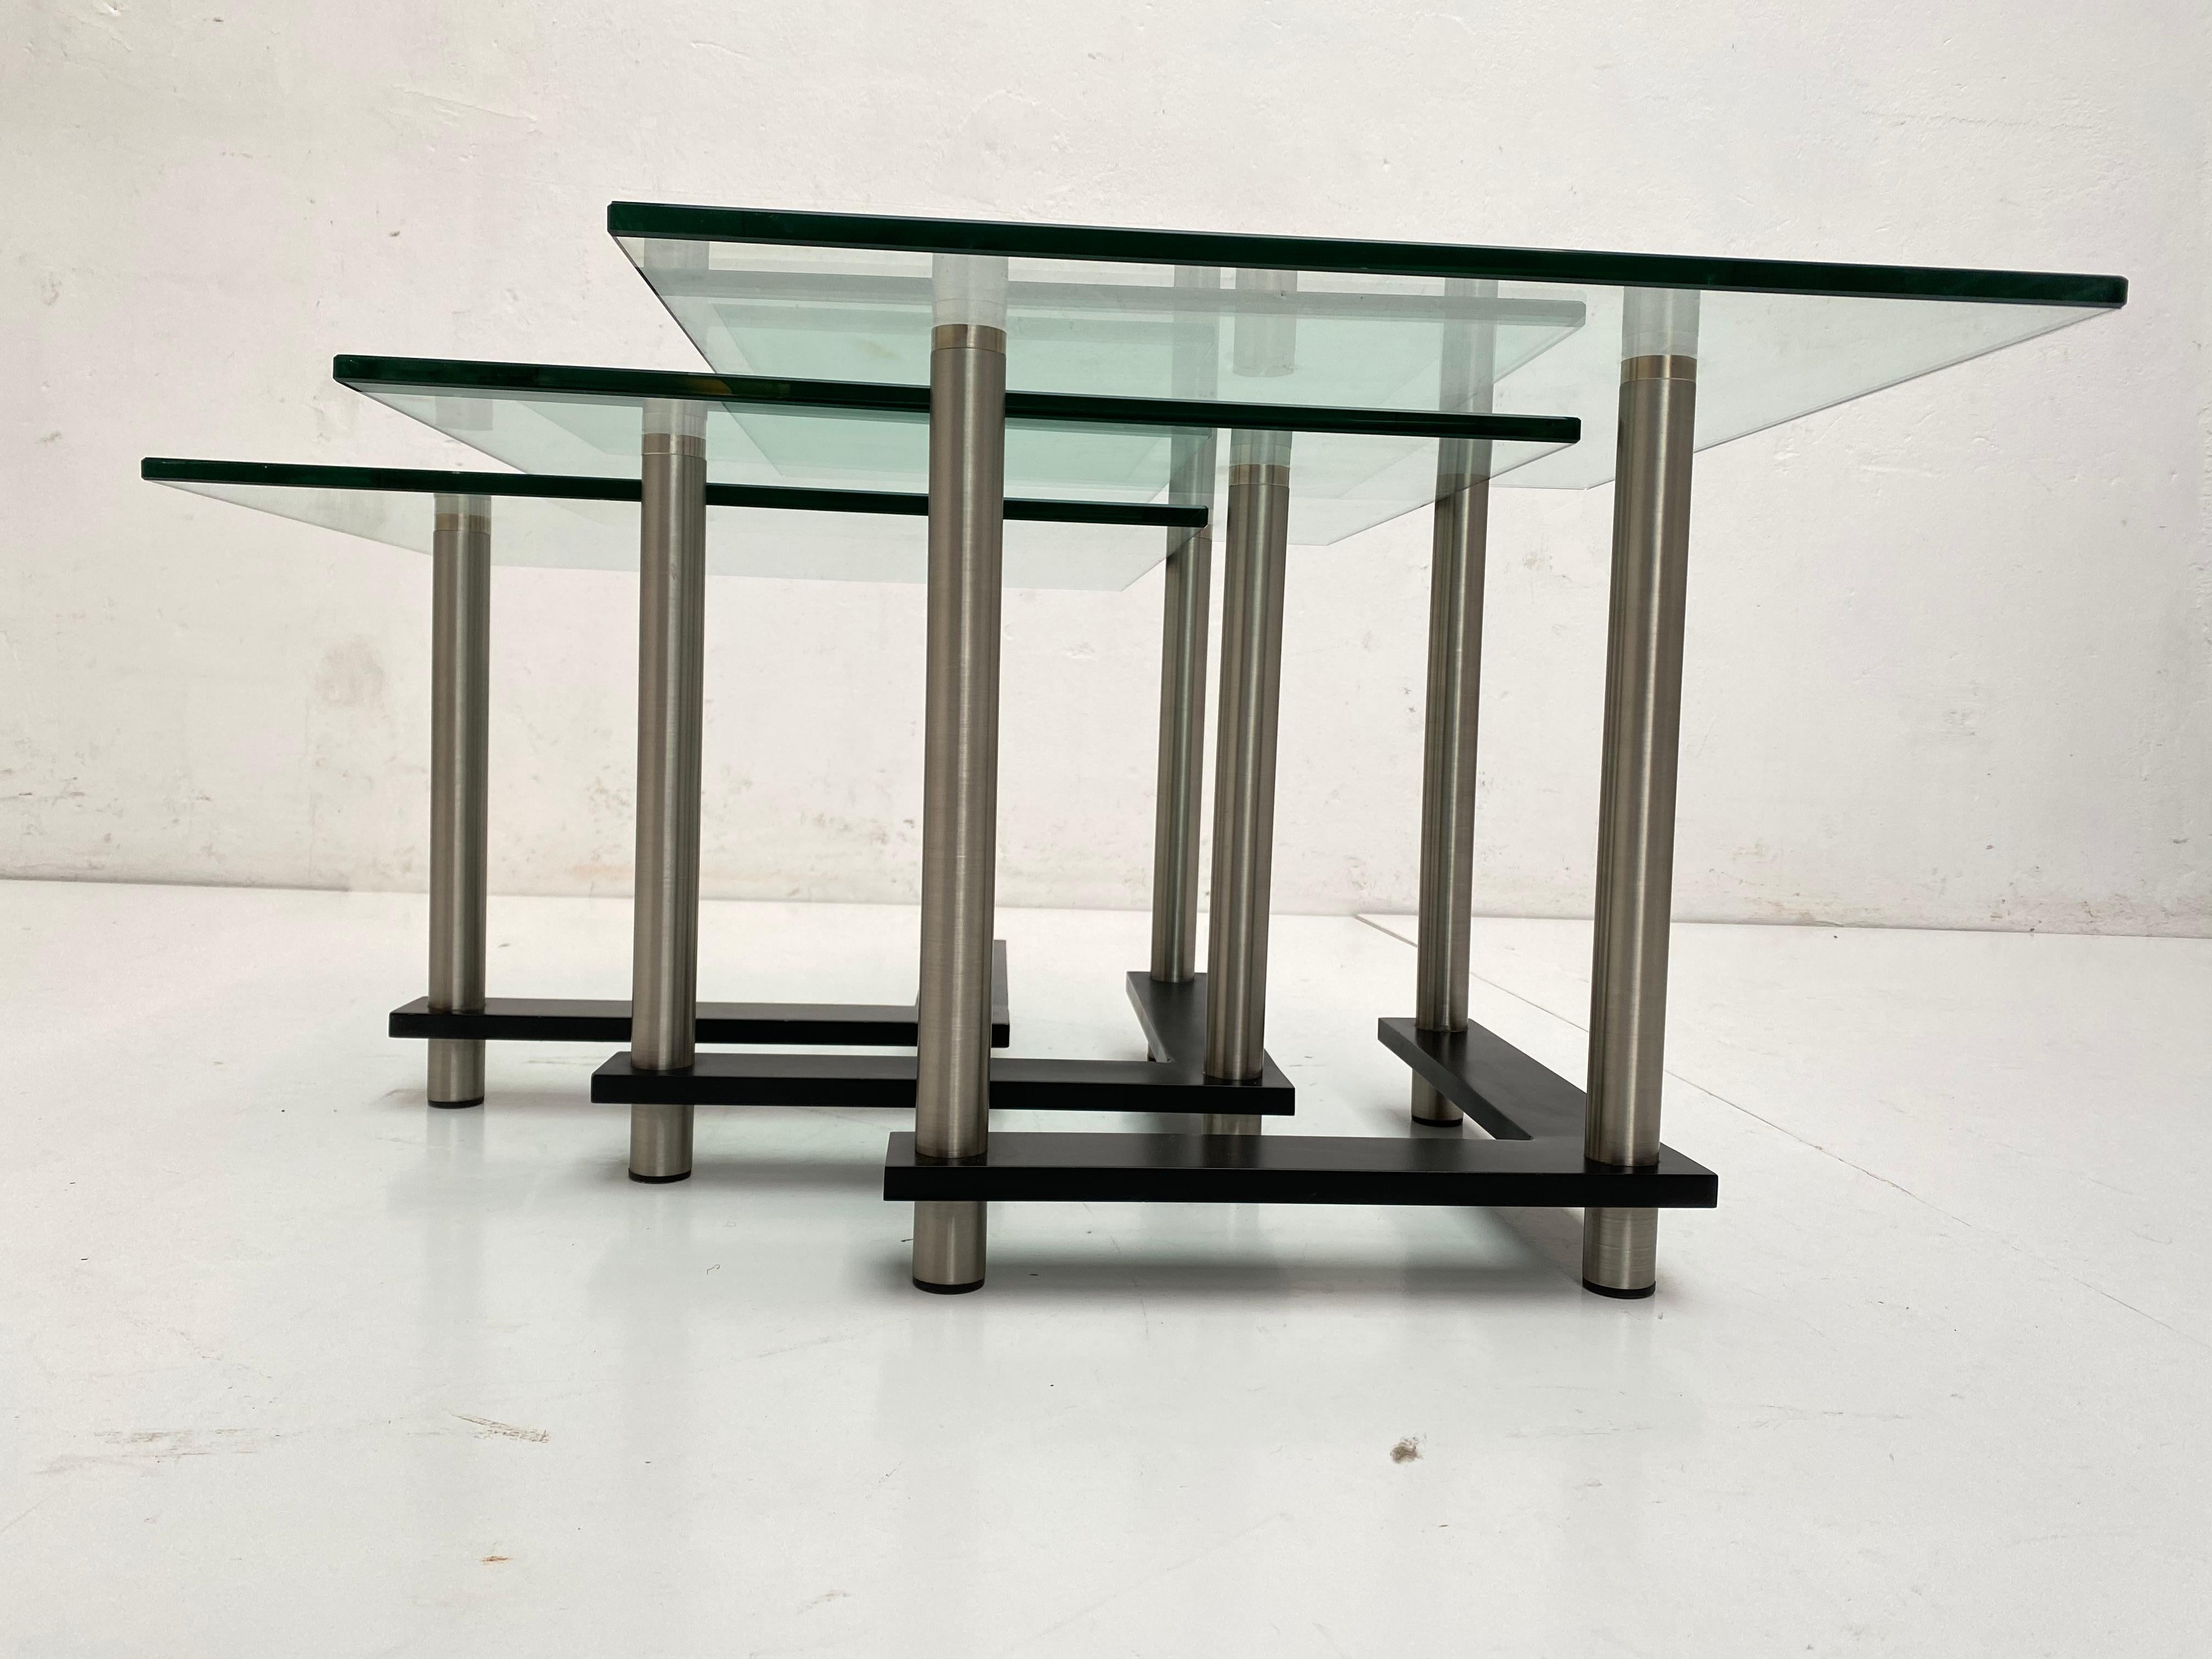 High quality production nesting tables from the 1980s with a Postmodern look

Thick tempered glass tops and stainless steel and black enameled solid metal base

Top quality production of unknown origin.